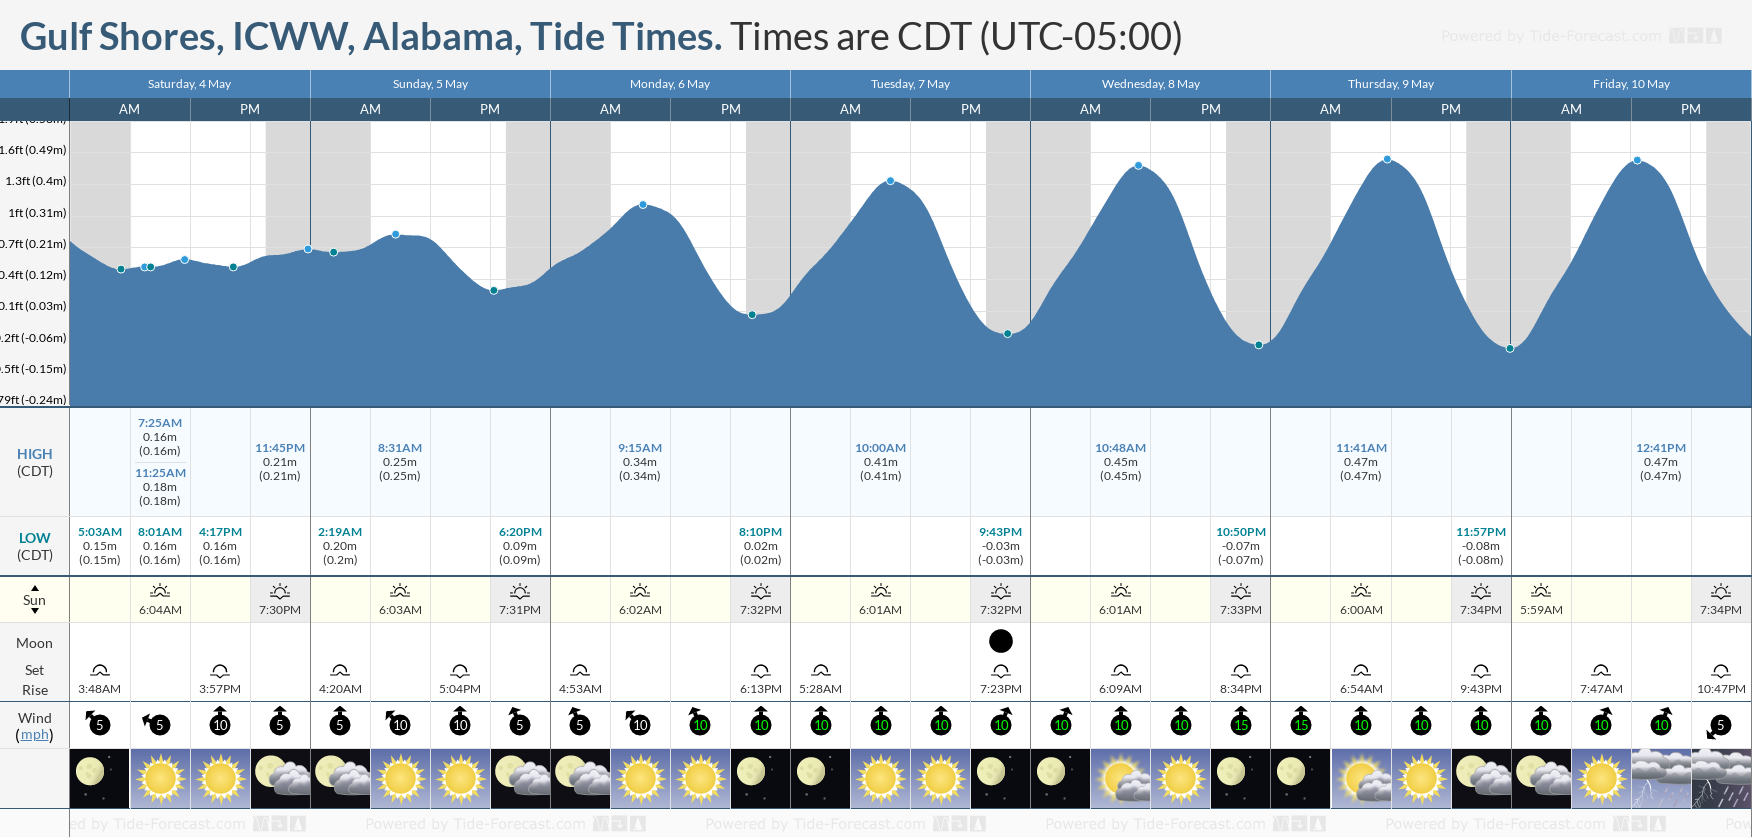 Gulf Shores, ICWW, Alabama Tide Chart including high and low tide times for the next 7 days